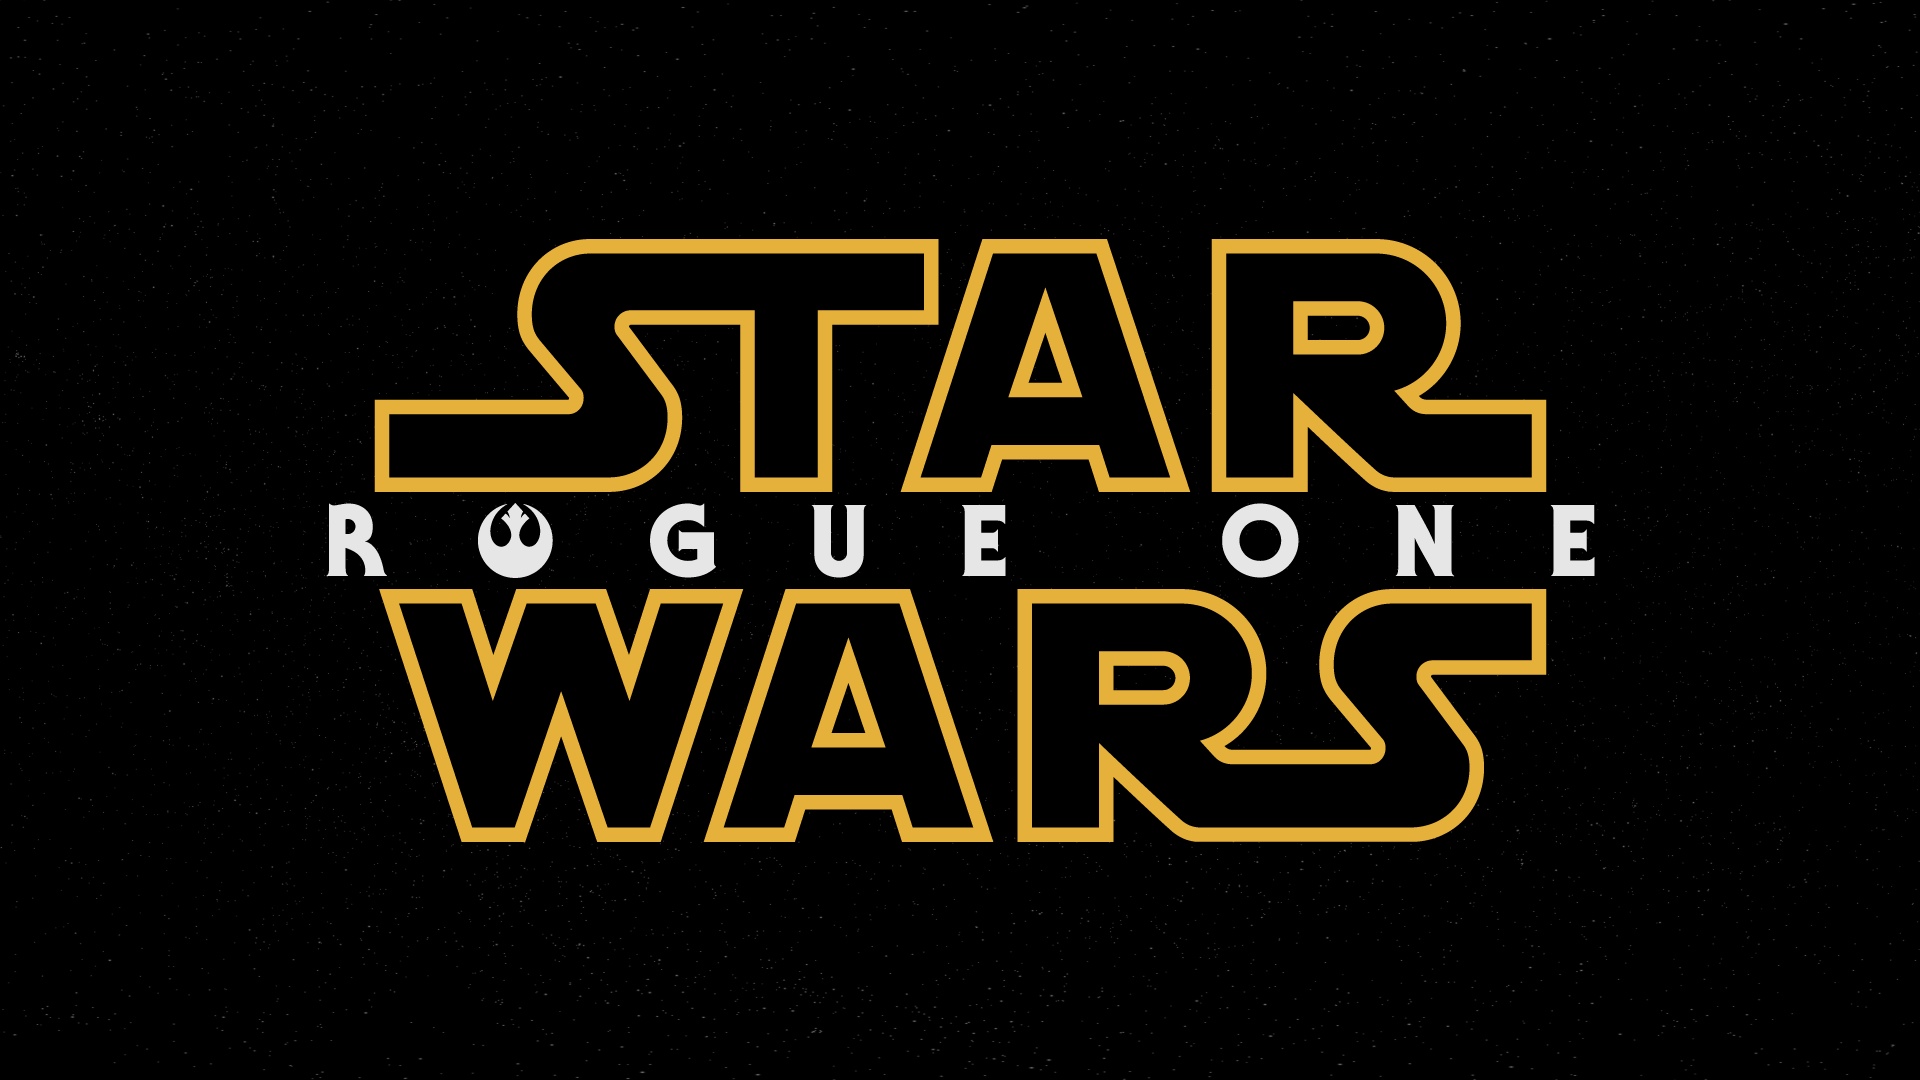 Star Wars Rogue One Logo Gephardt Daily